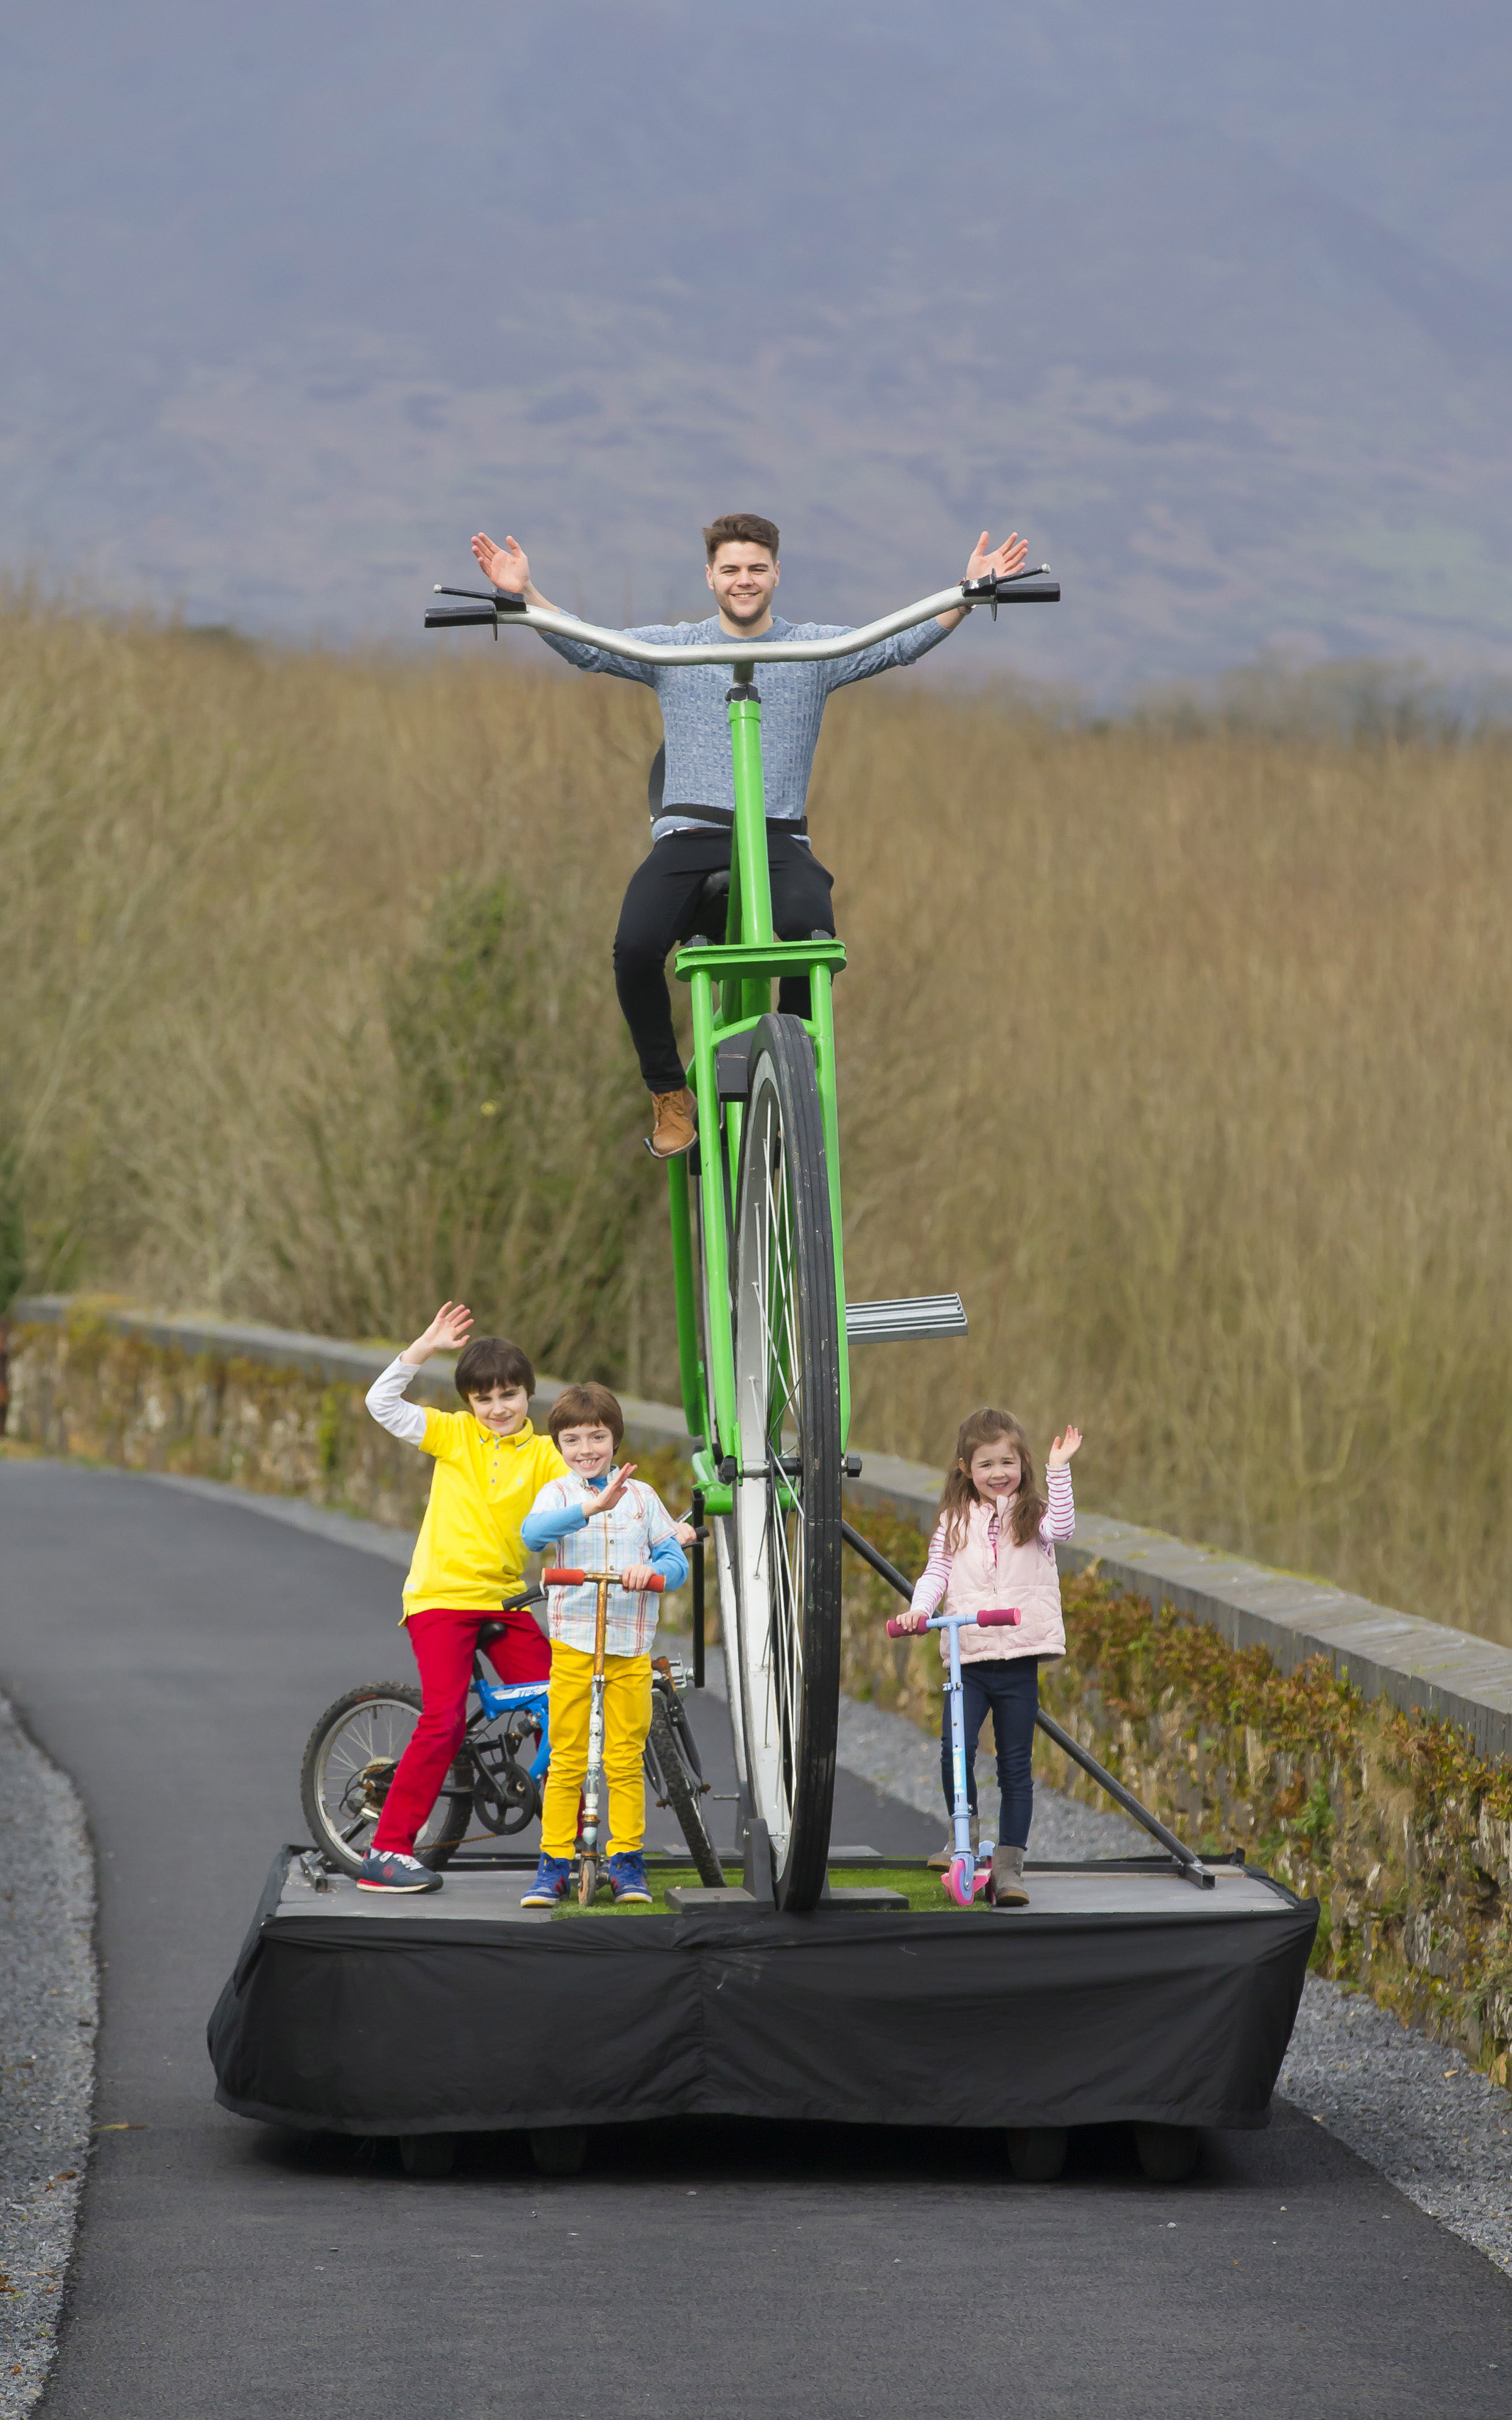 Pictured on the Waterford Greenway is Mayor of Waterford, Cllr Adam Wyse on a giant bicycle created by street arts company Buí Bolg along with Joshua Moran-Davy (10), Reuben Moran-Davy (7) and Leah Moran-Saunders (5) from Passage East, Co Waterford. (Picture: Patrick Browne)